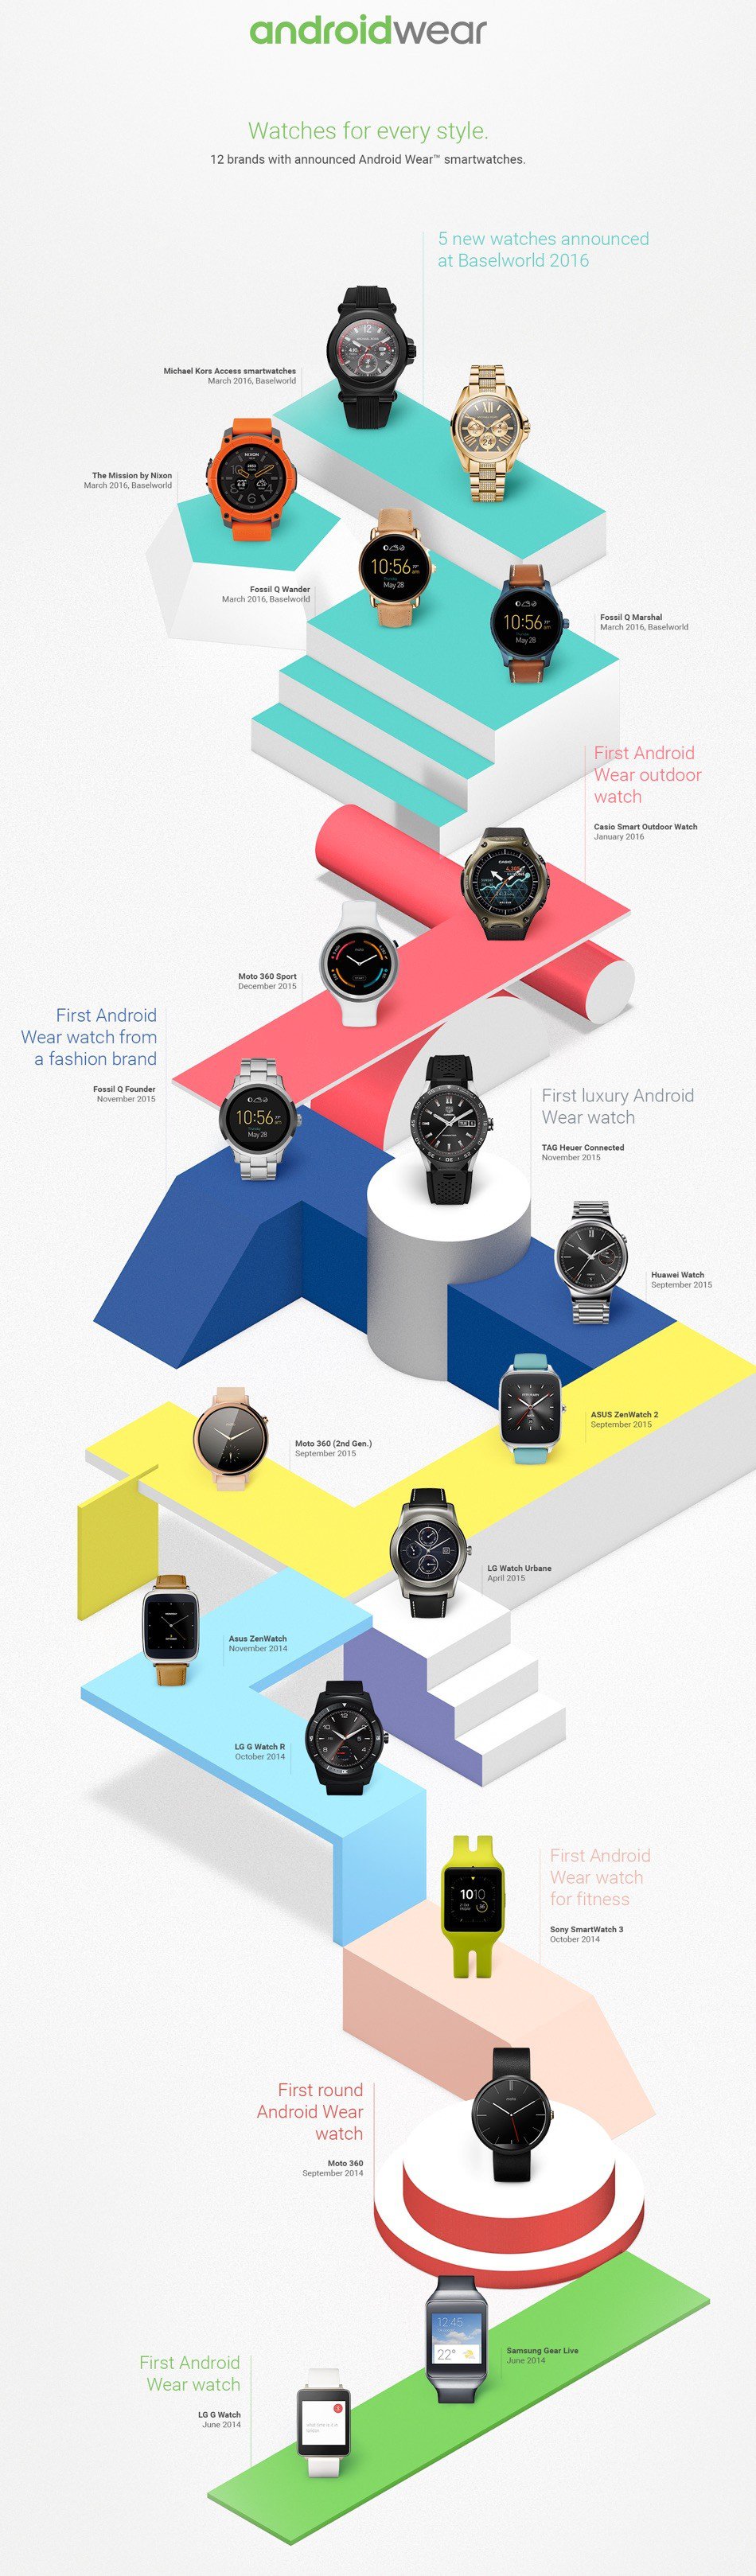 Android Wear historia